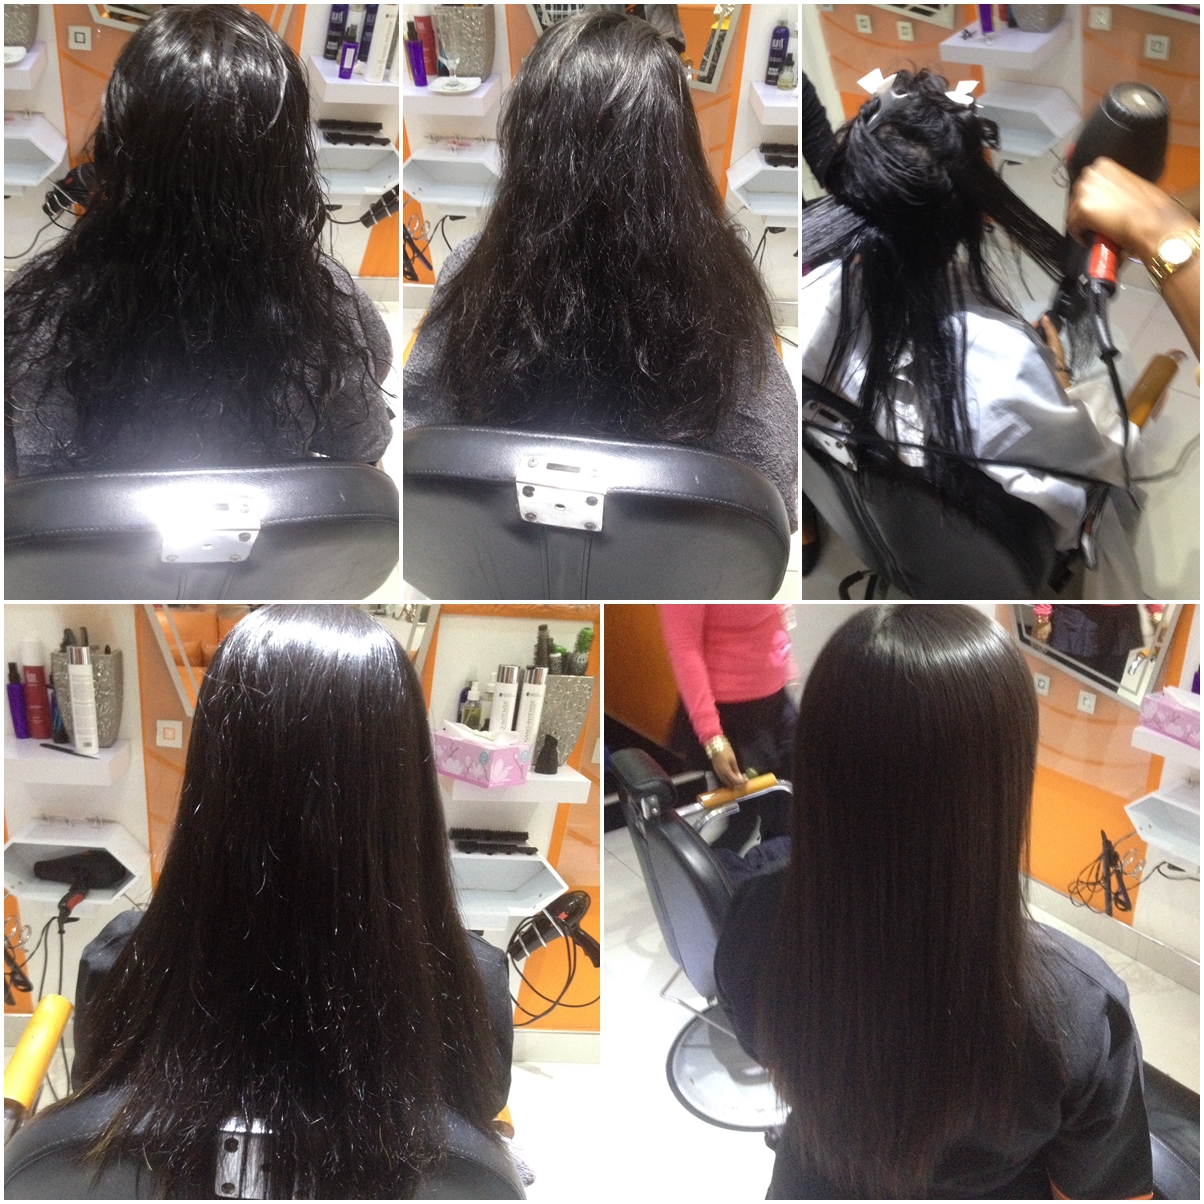 KERATIN ANTI FRISS HAIR STRAINTENING TREATMENT NOW AVAILABLE AT SALON CLEO SOUTH AFRICA 0315009998